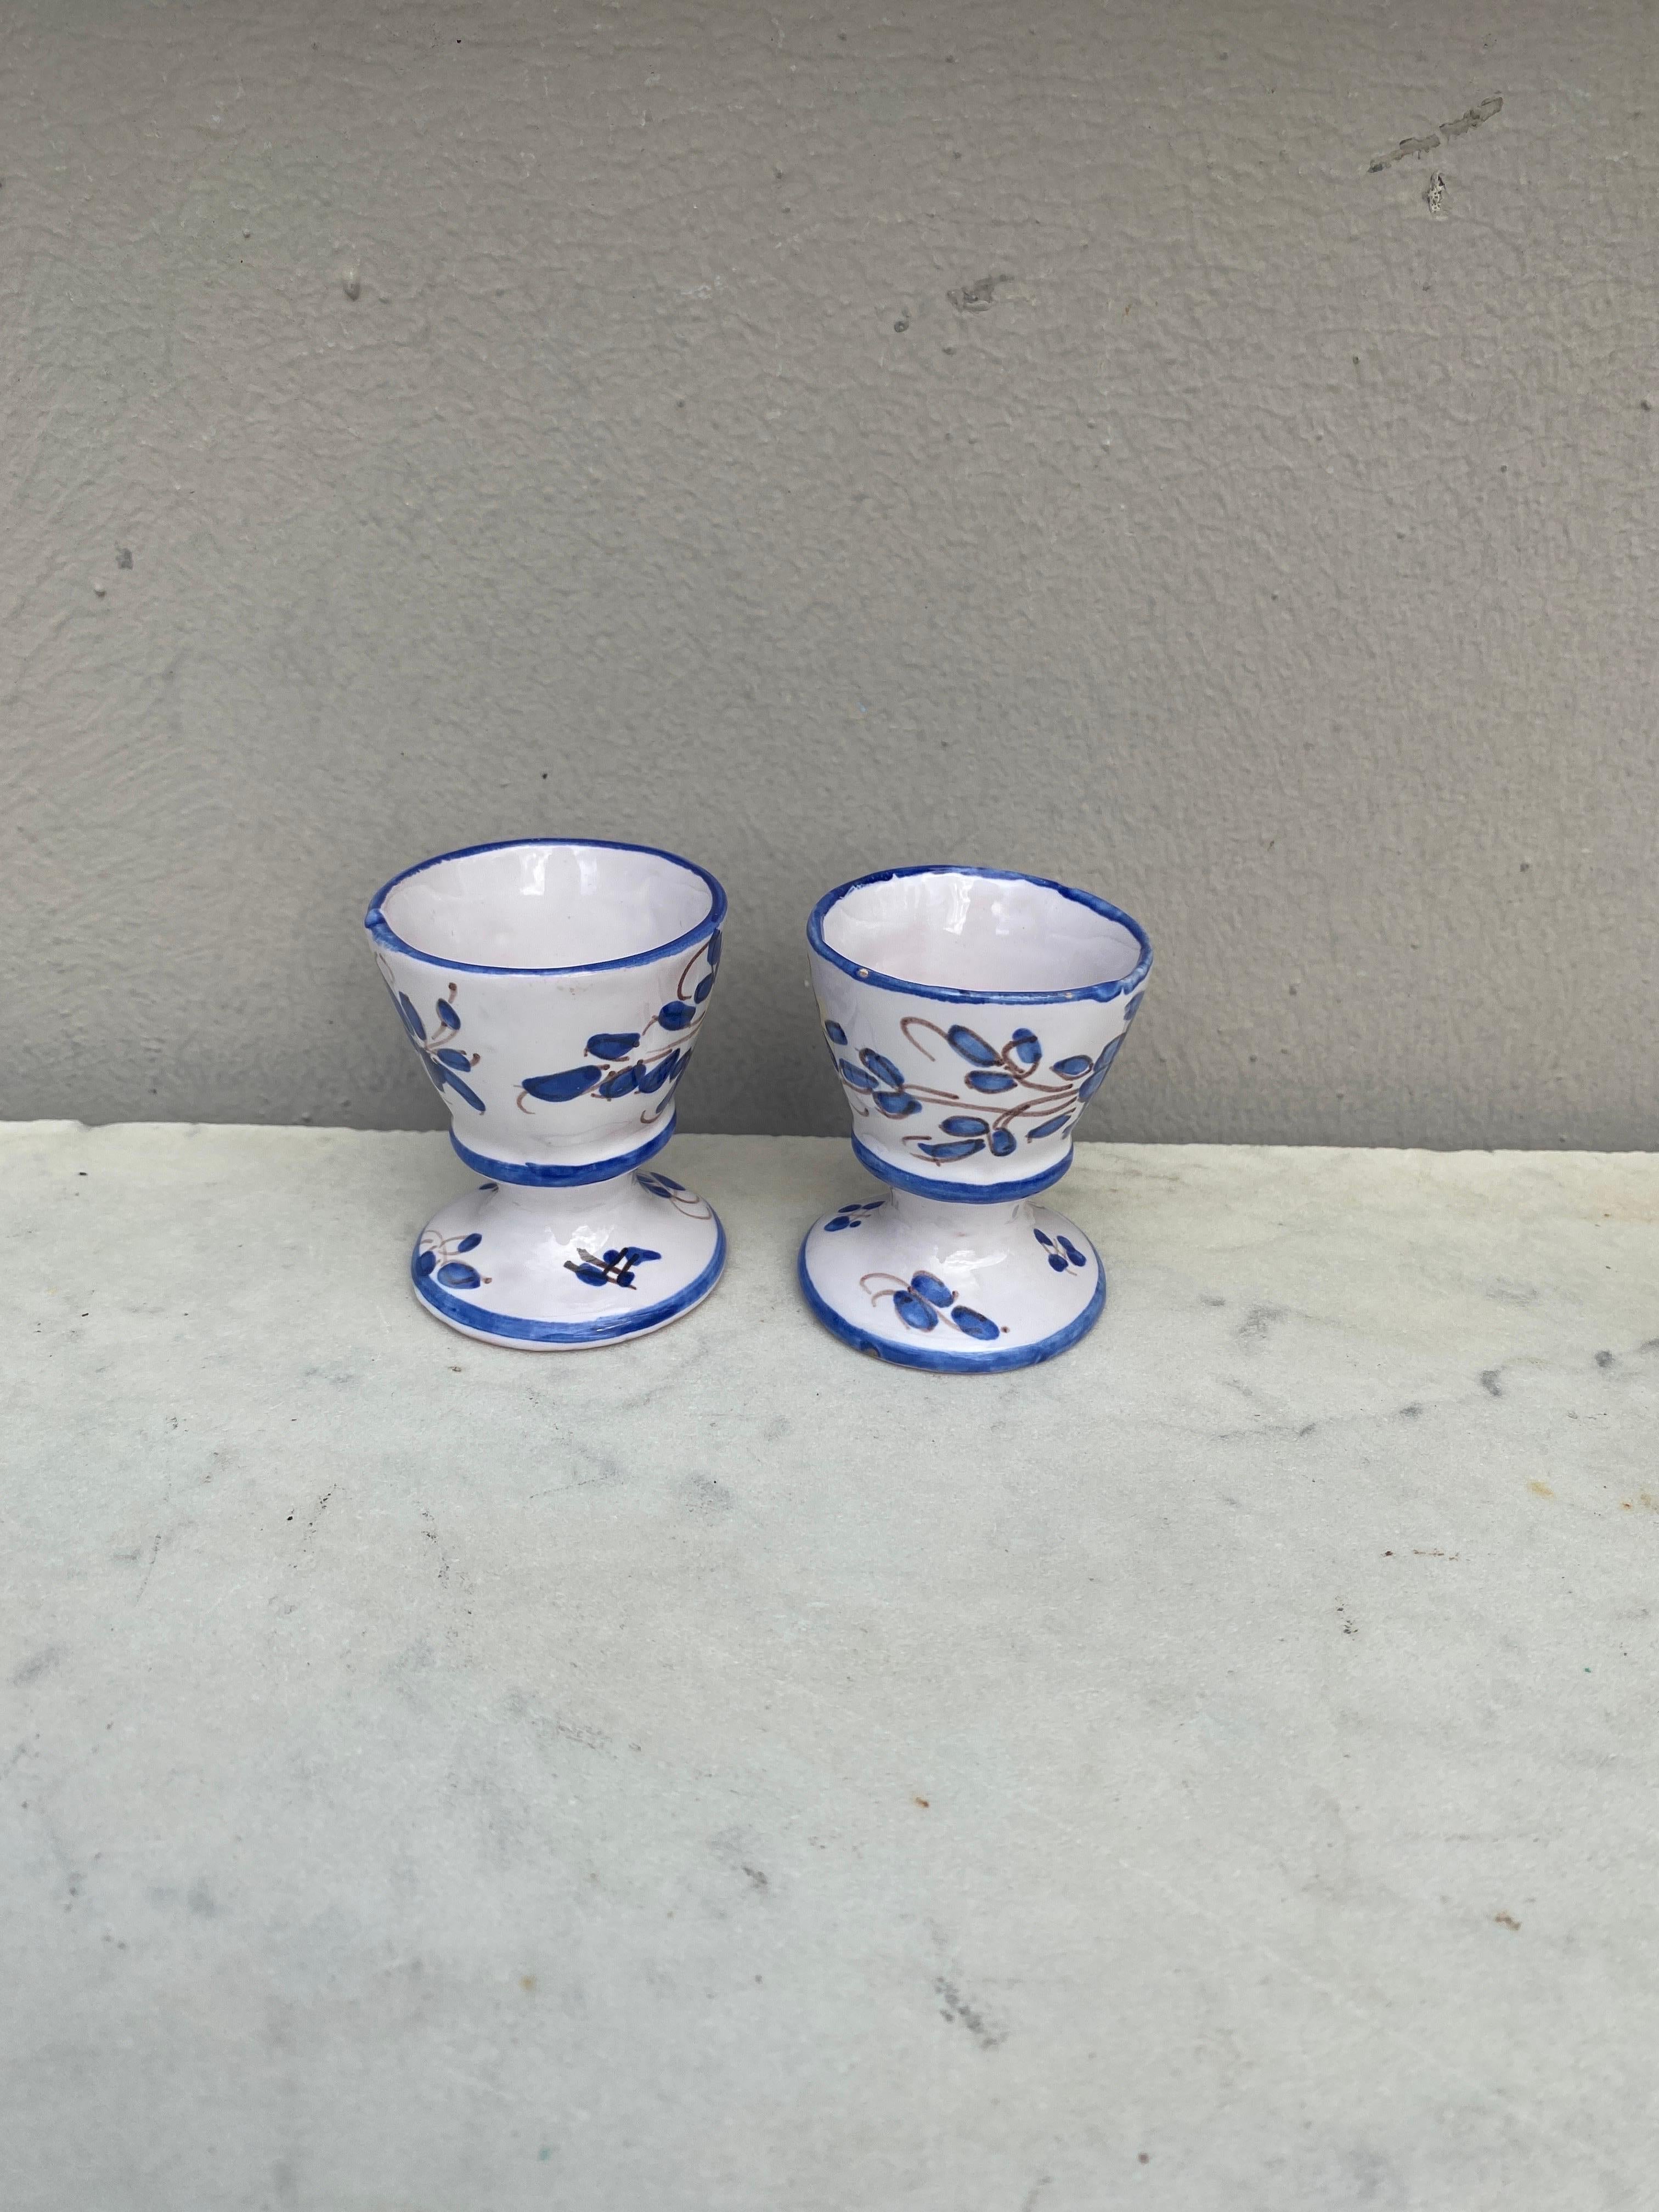 French Provincial Pair of Blue & White Faience Egg Cups Martres Tolosane For Sale